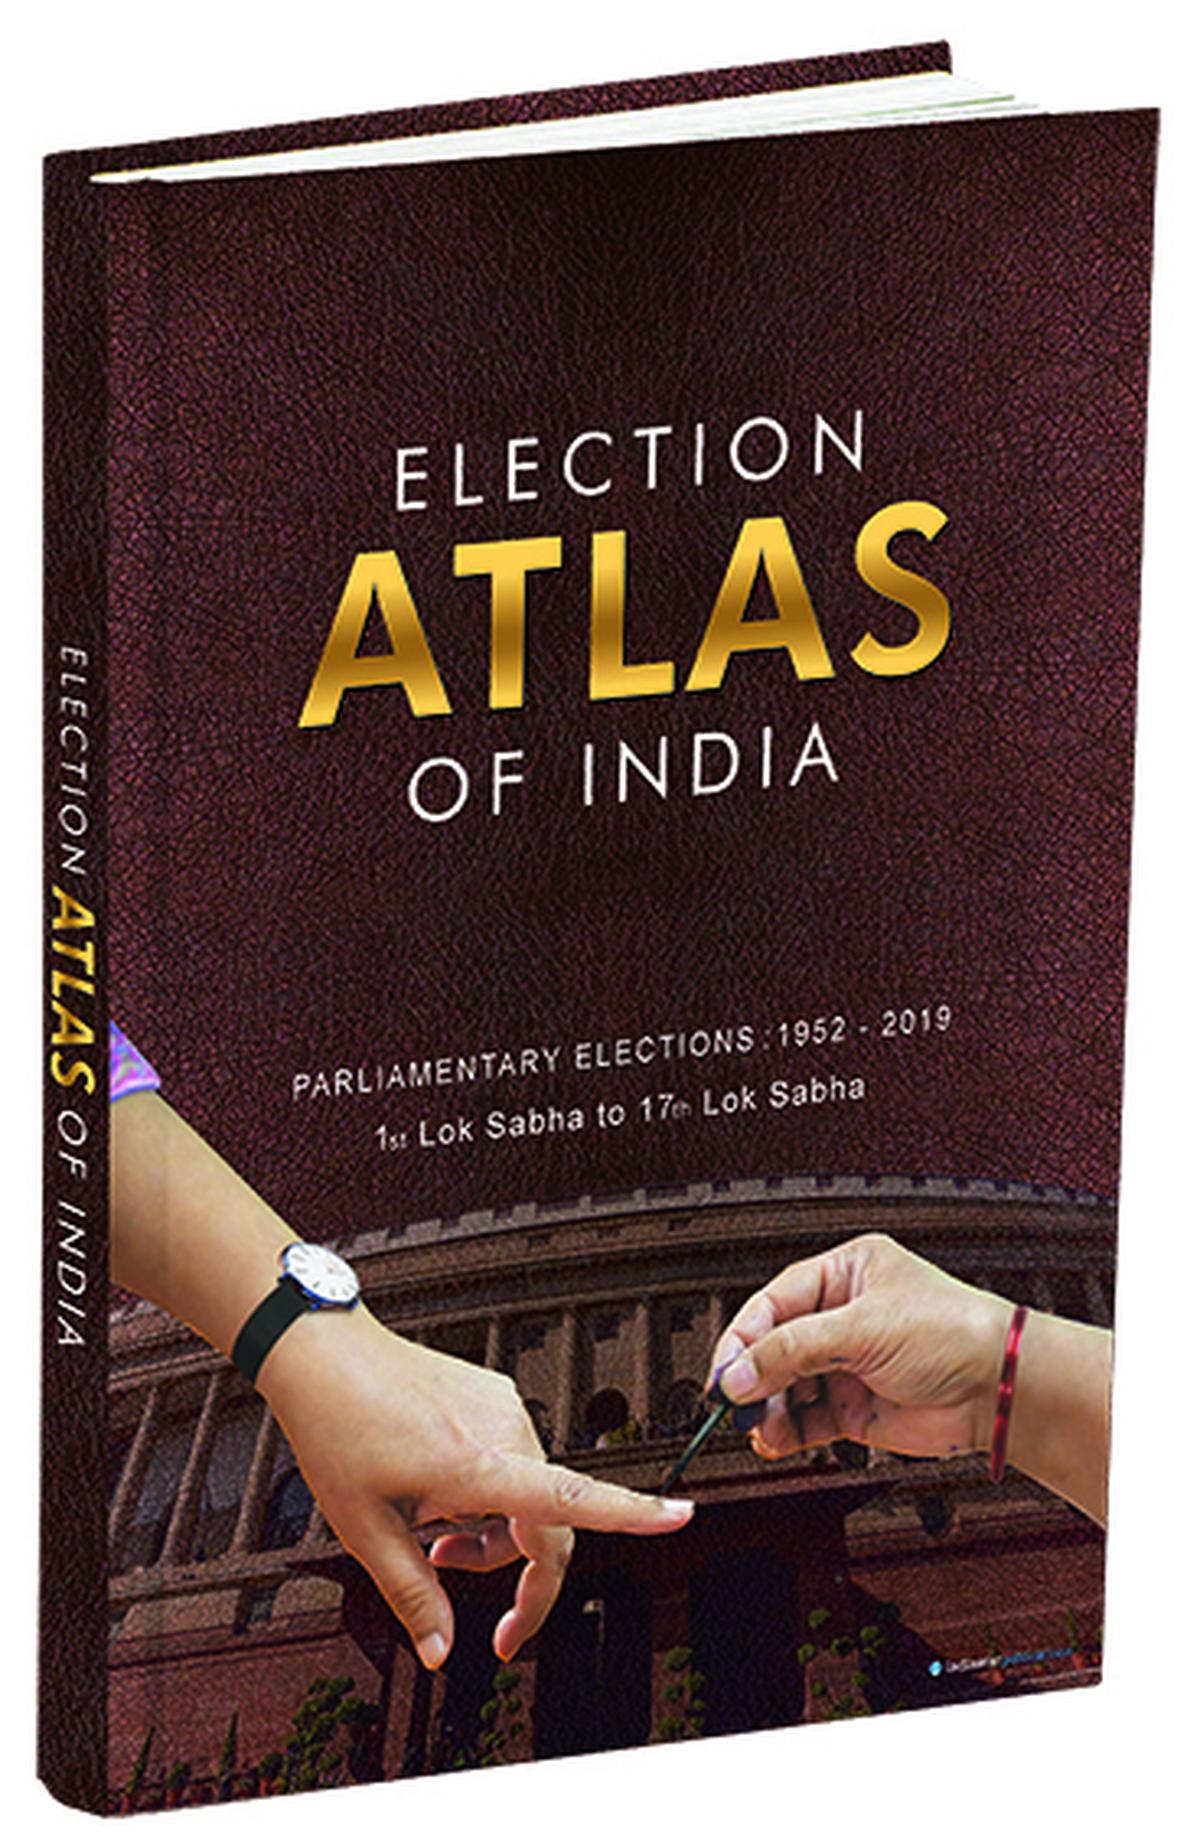 The 'Election Atlas of India' has over 500 pages of information and maps